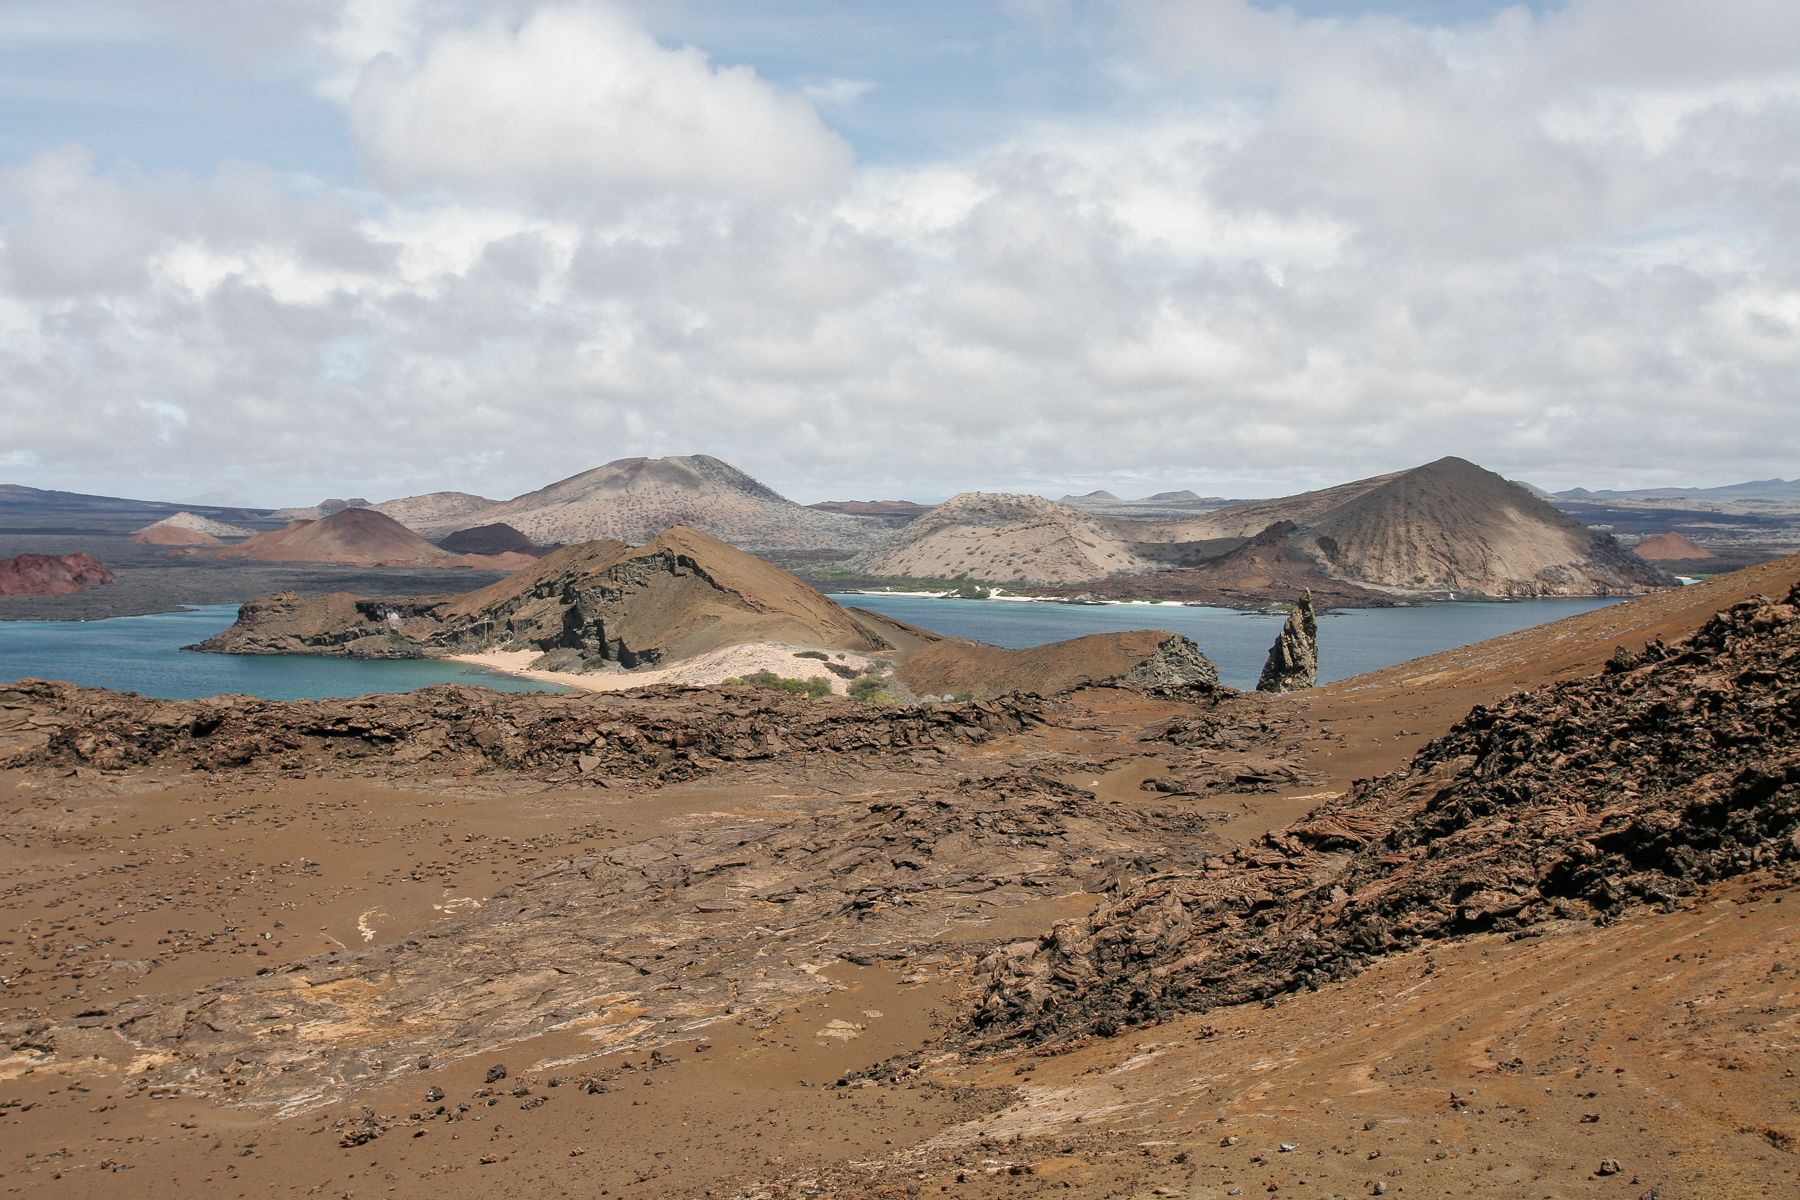 The dramatic volcanic scenery of the Galapagos Islands